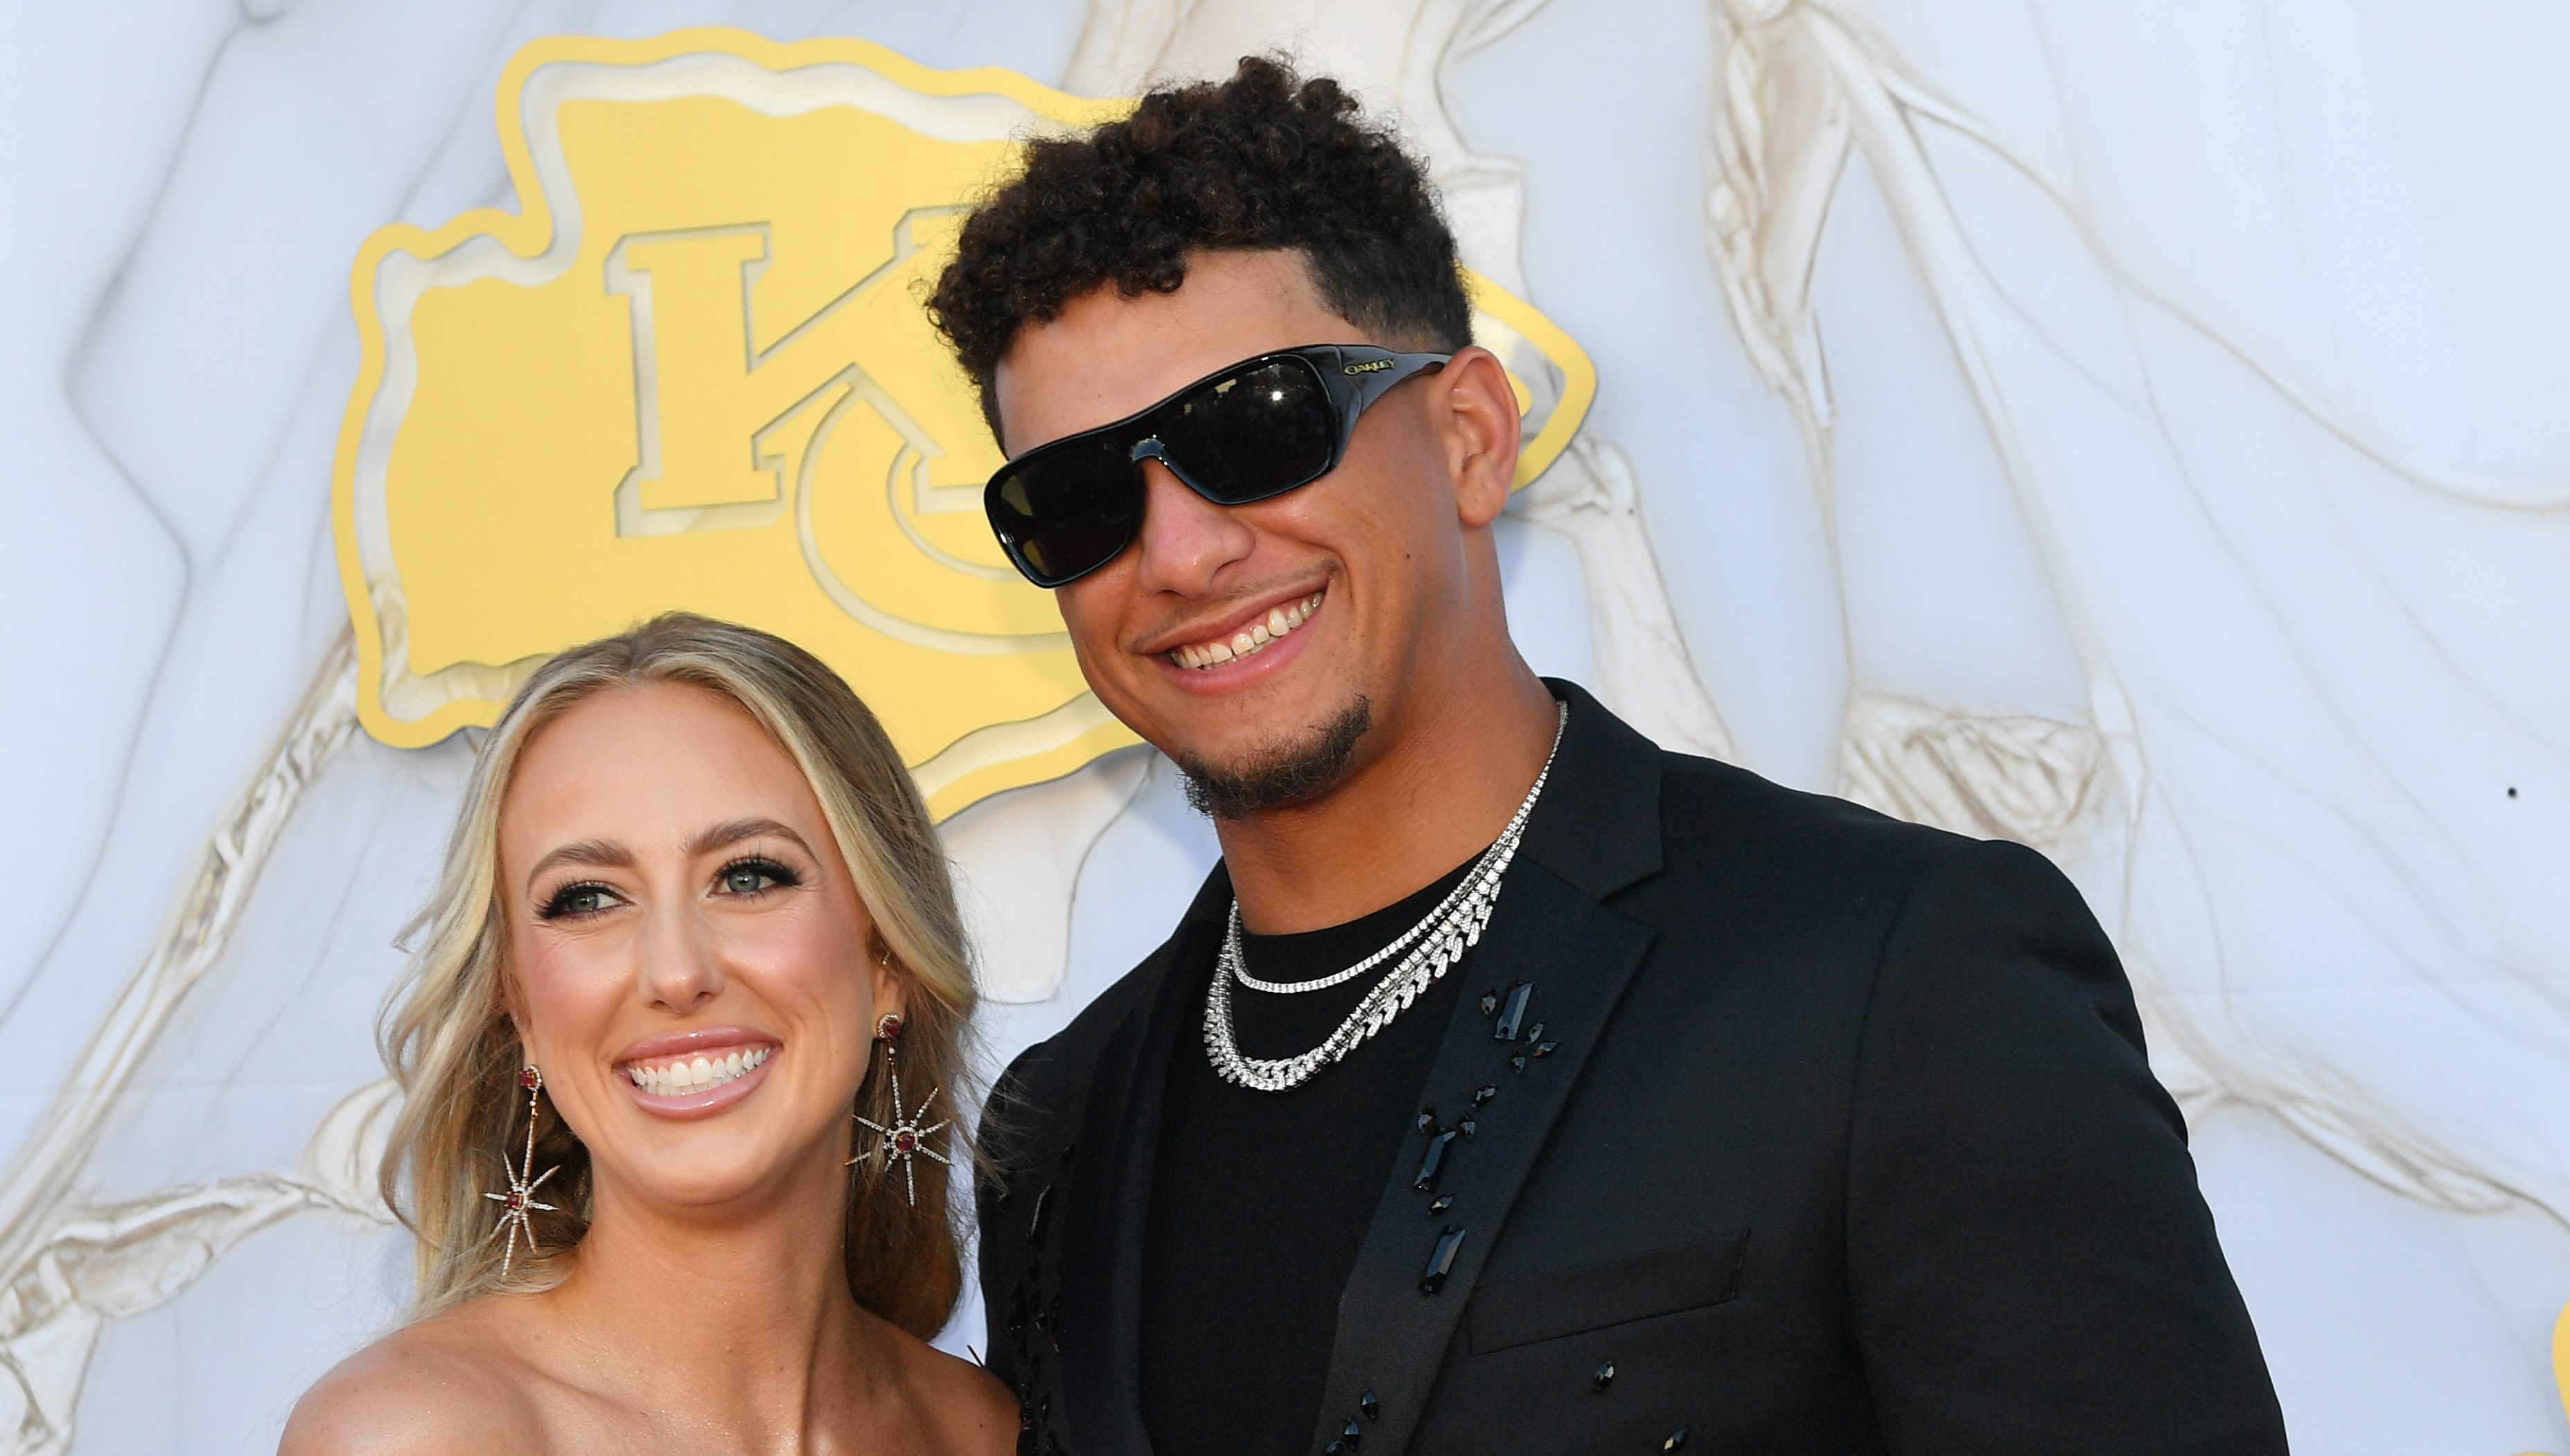 Patrick Mahomes Says He & Wife Brittany Are ‘Done’ Having Kids After Baby No. 3